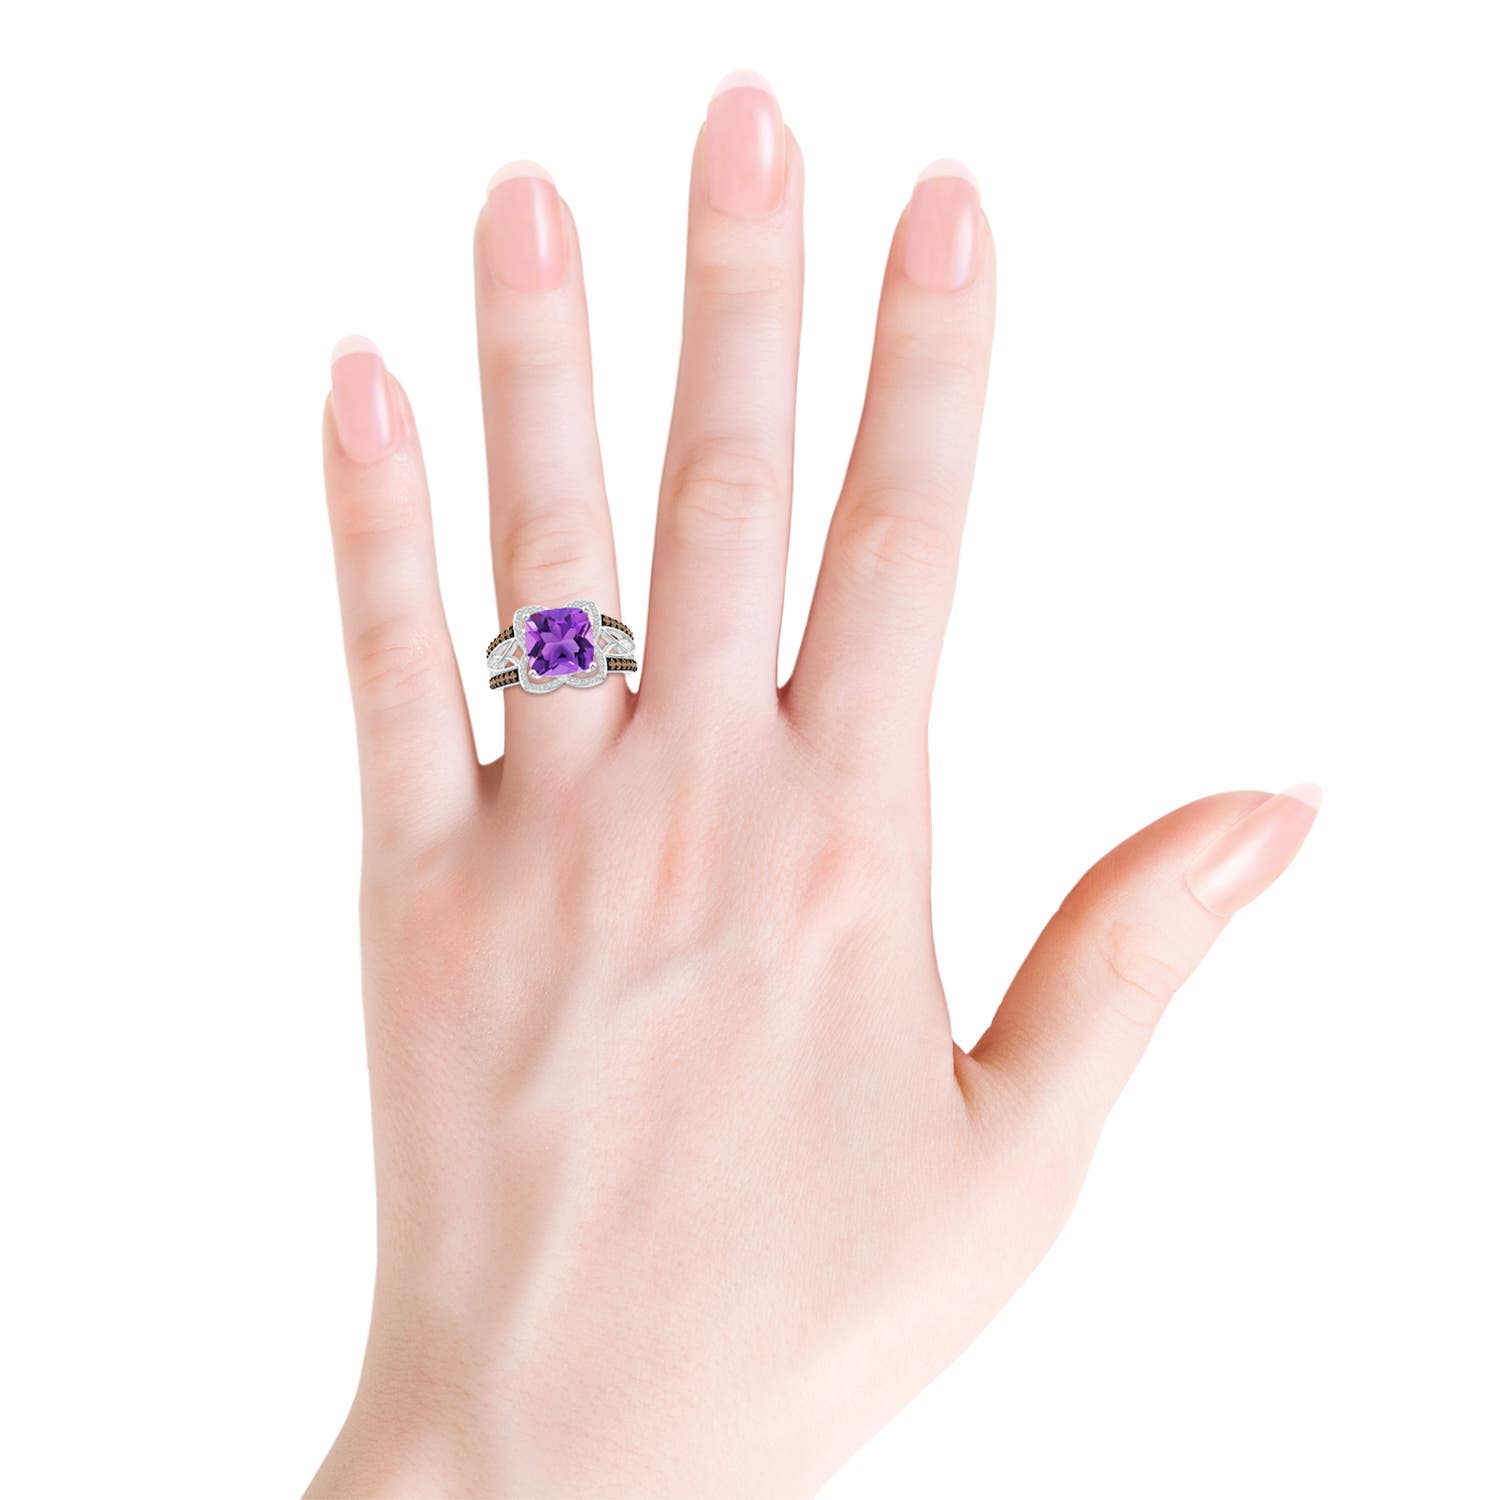 AAA - Amethyst / 3.61 CT / 14 KT White Gold